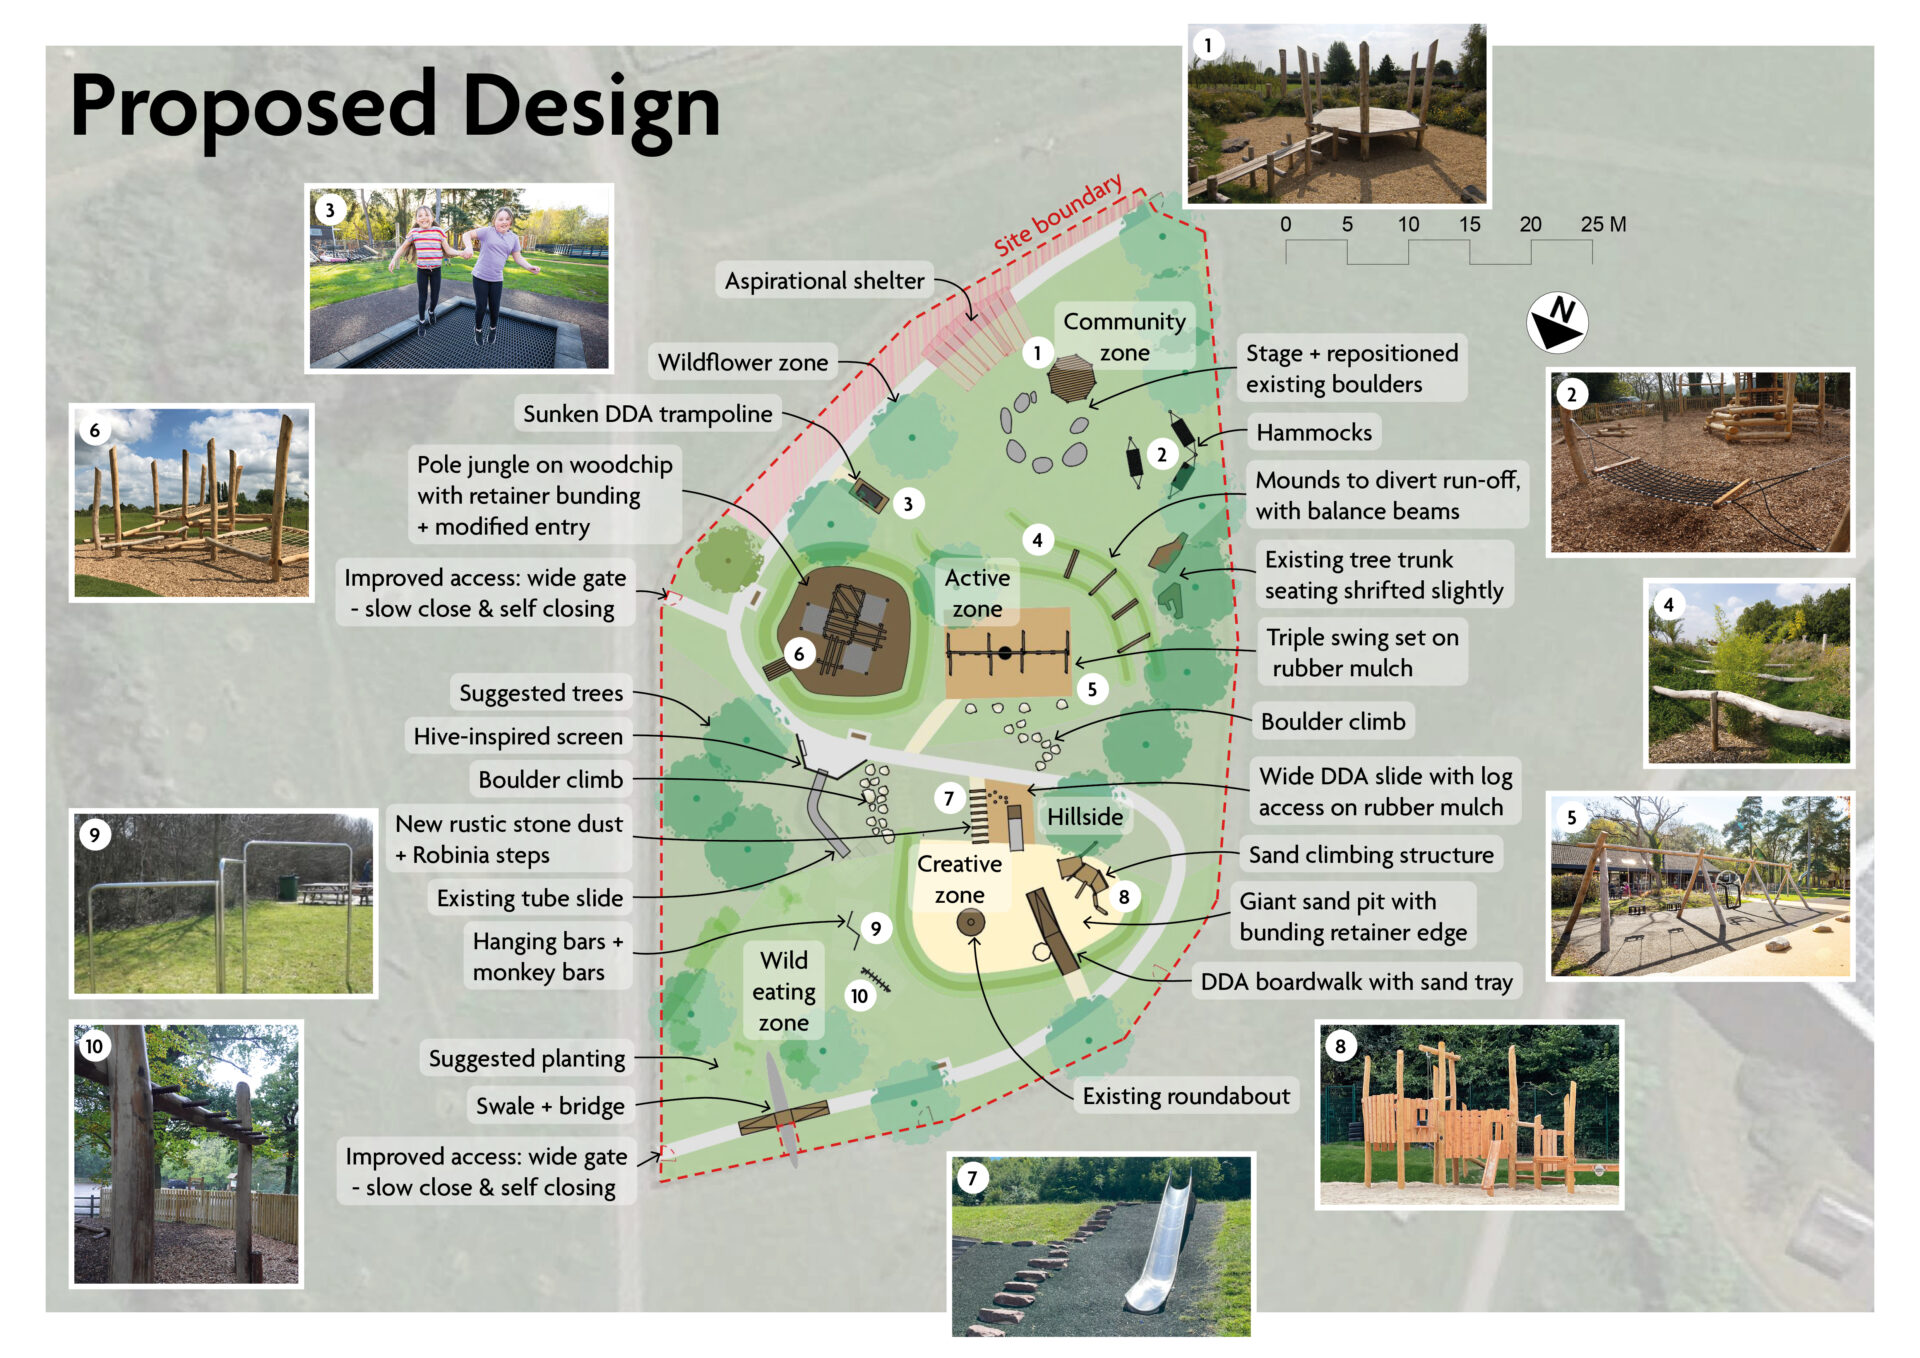 Proposed design map showing Old Showfield play park design split into 4 to 5 zones with a mix of new and existing equipment and improved access